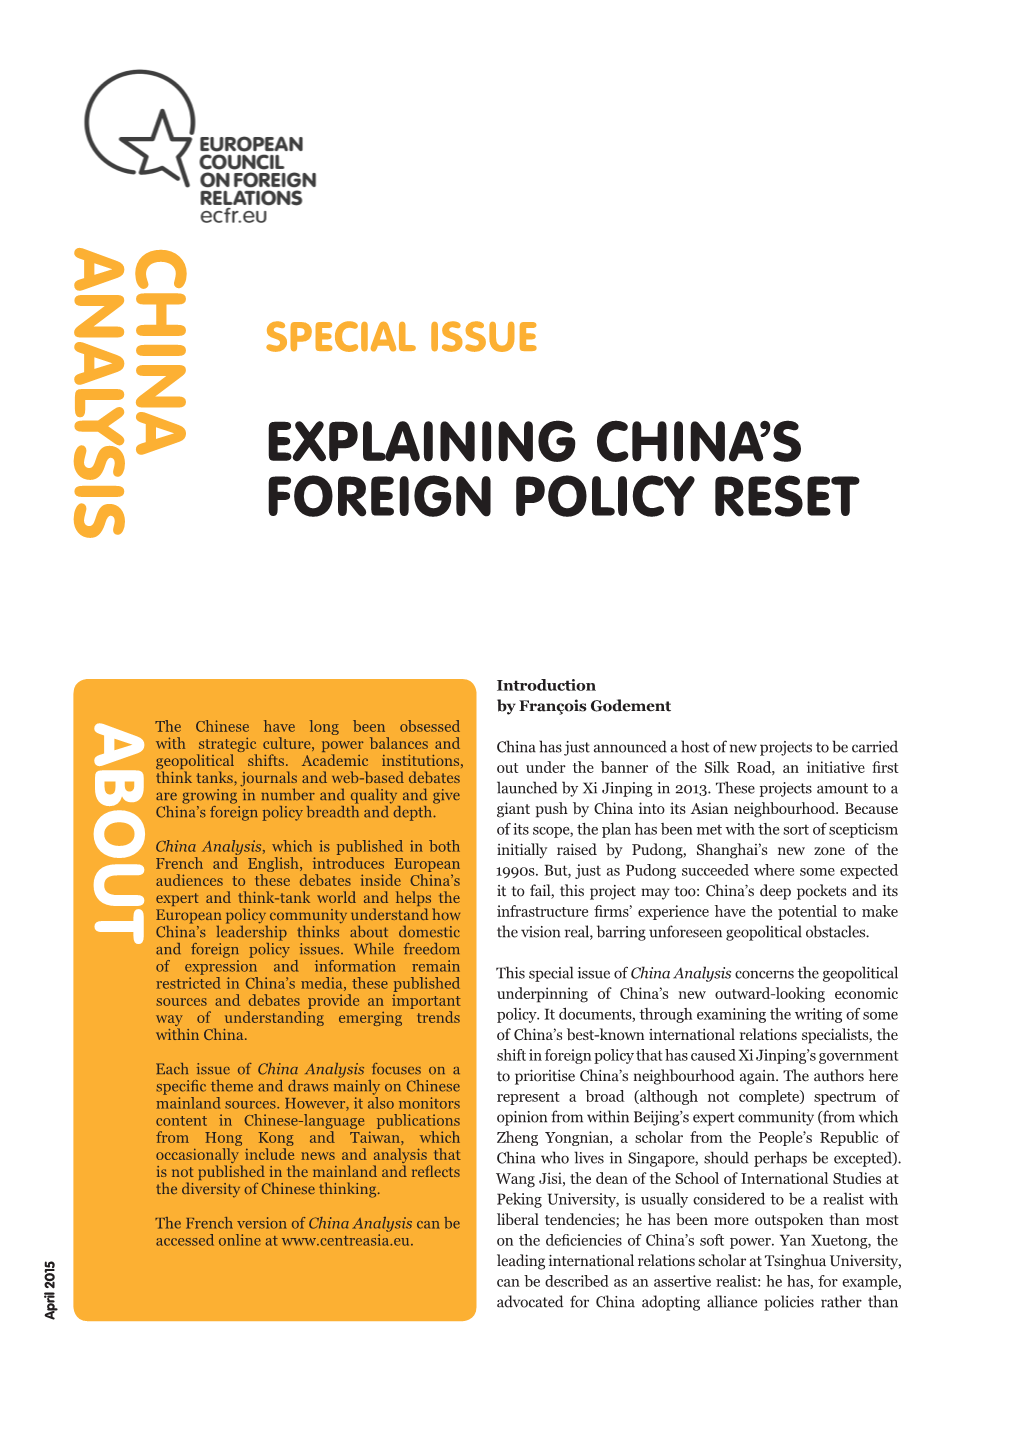 Explaining China's Foreign Policy Reset